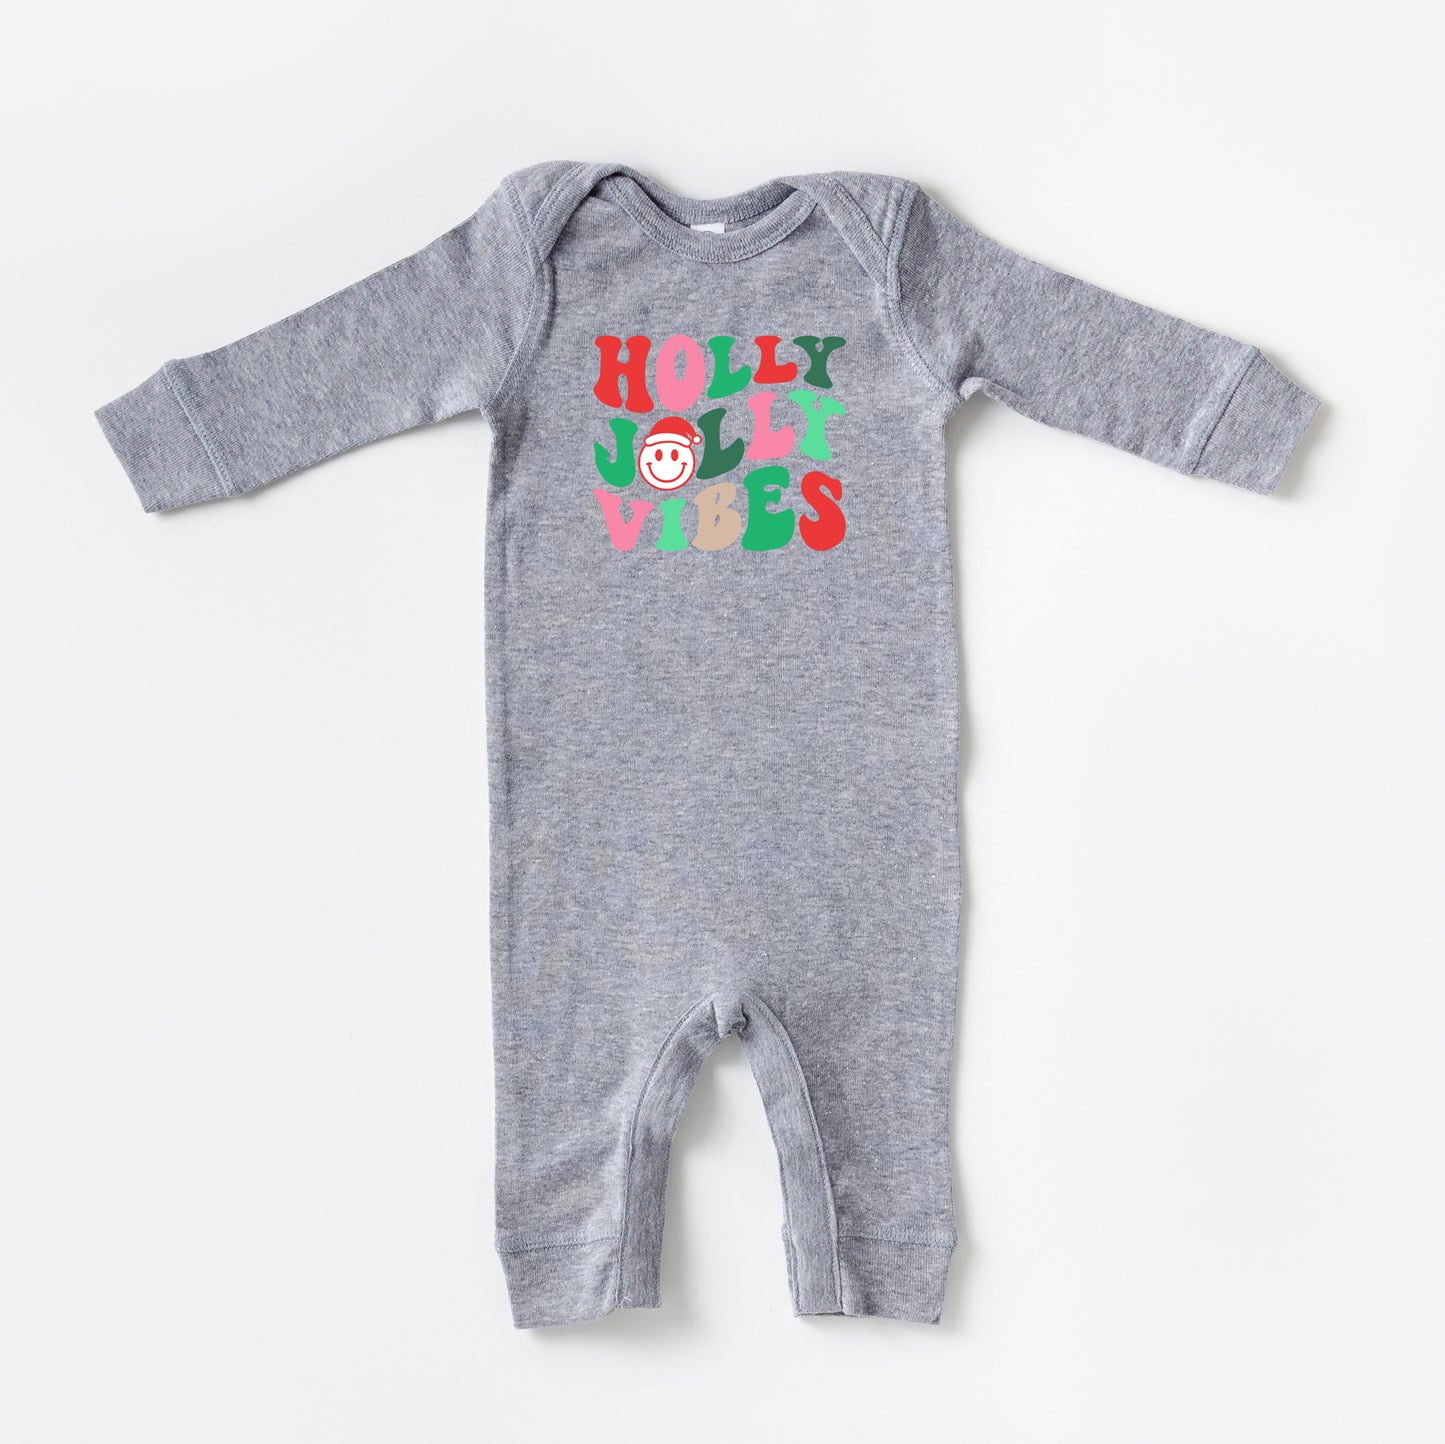 Holly Jolly Vibes Smile | Baby Romper